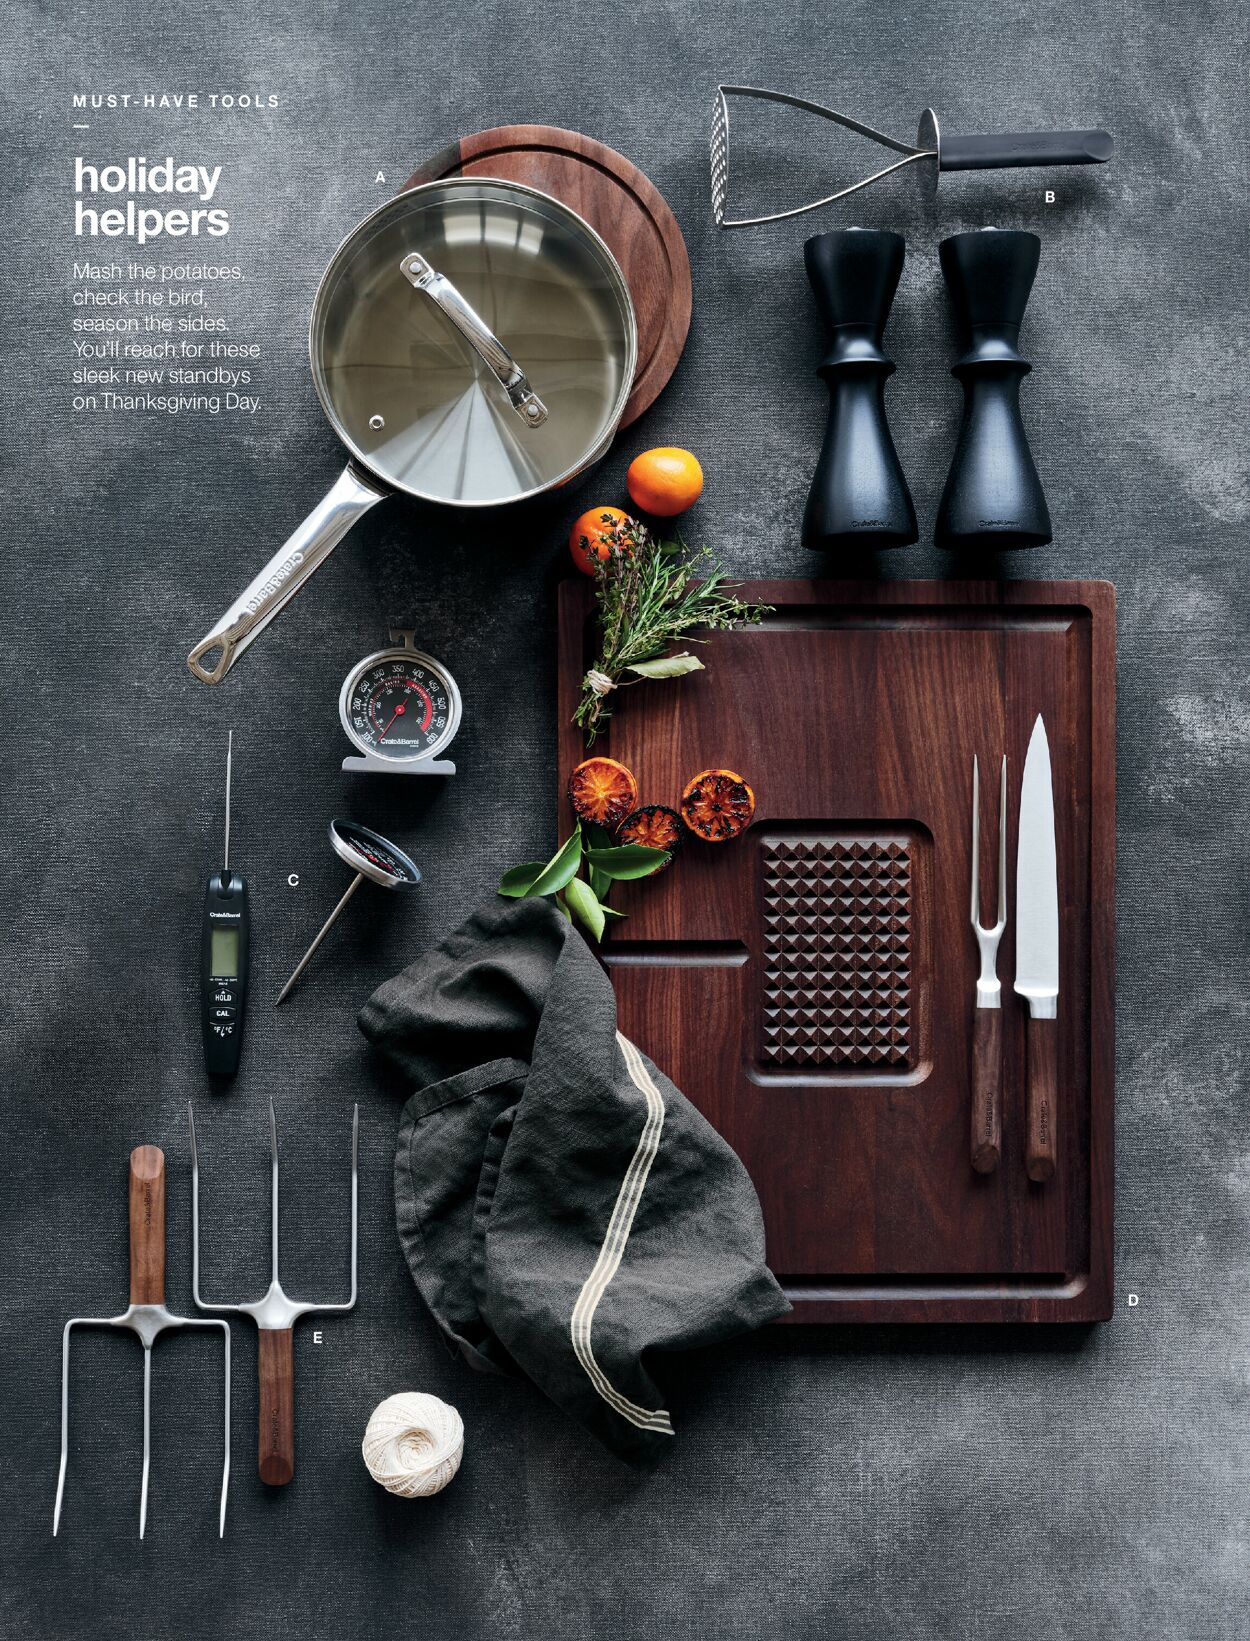 Crate & Barrel Ad from 10/25/2022